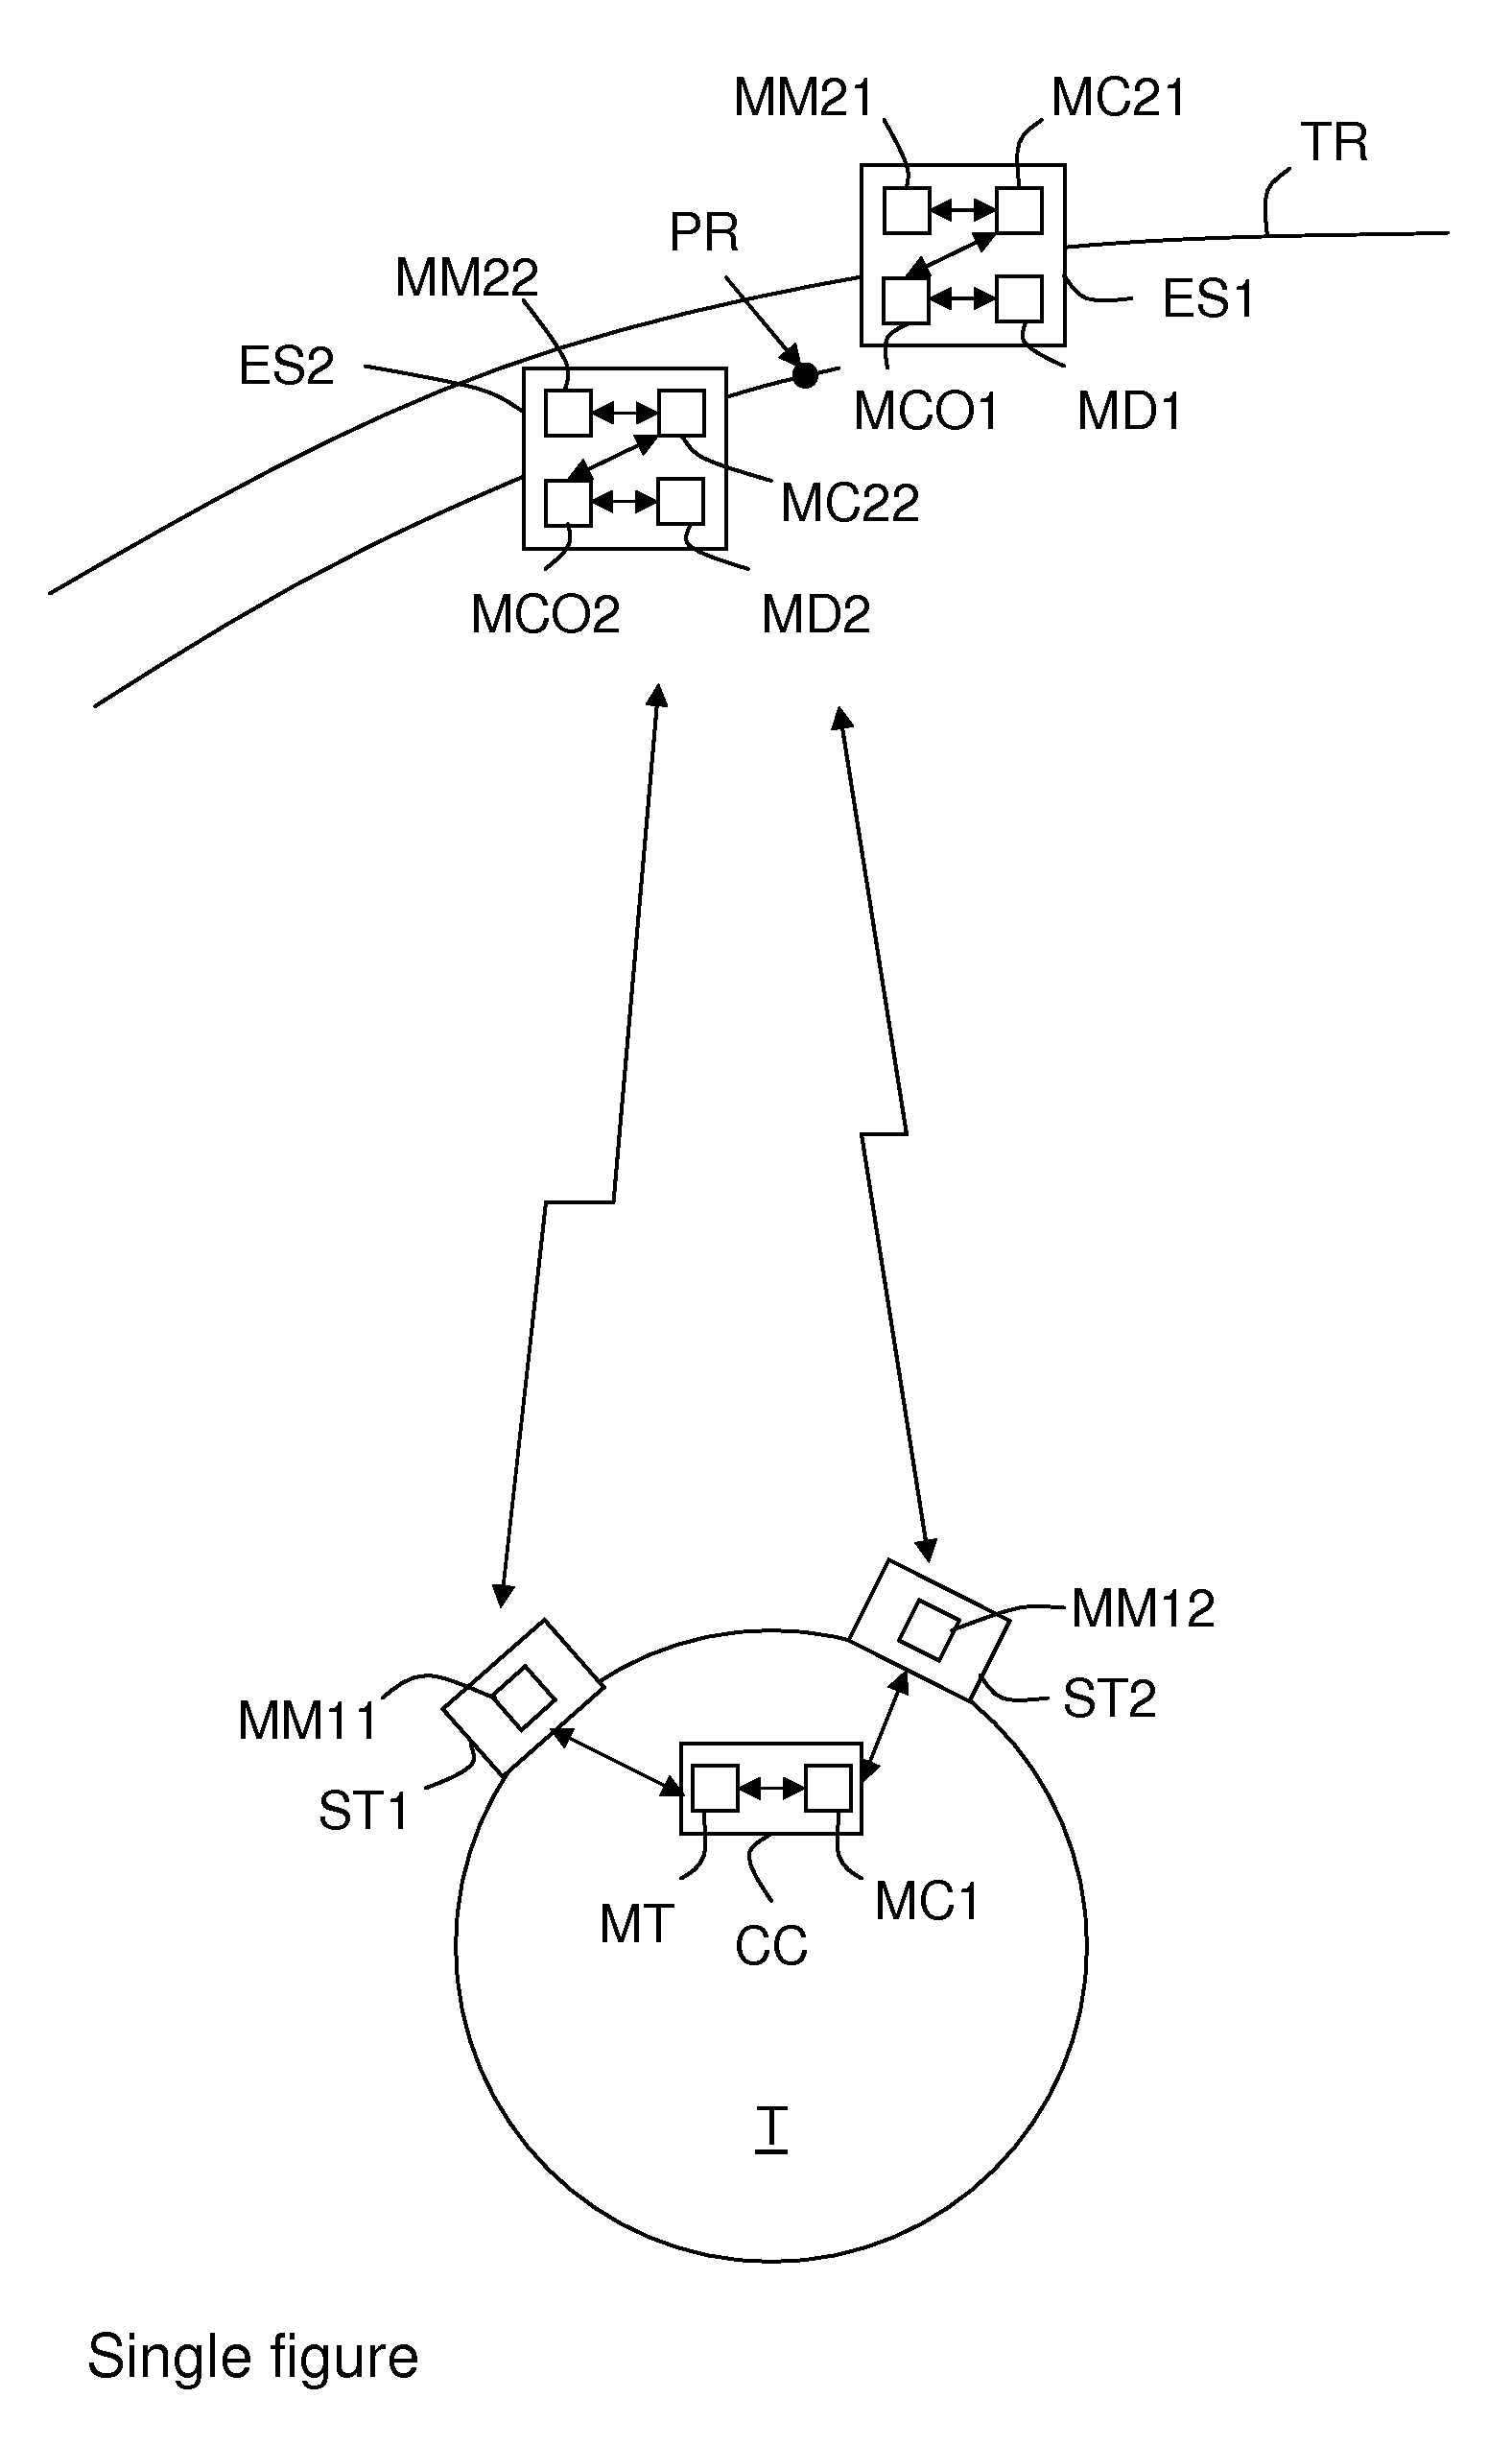 System for controlling the deployment of spacecraft required to fly in formation, by simultaneous and high-precision determination of their positions